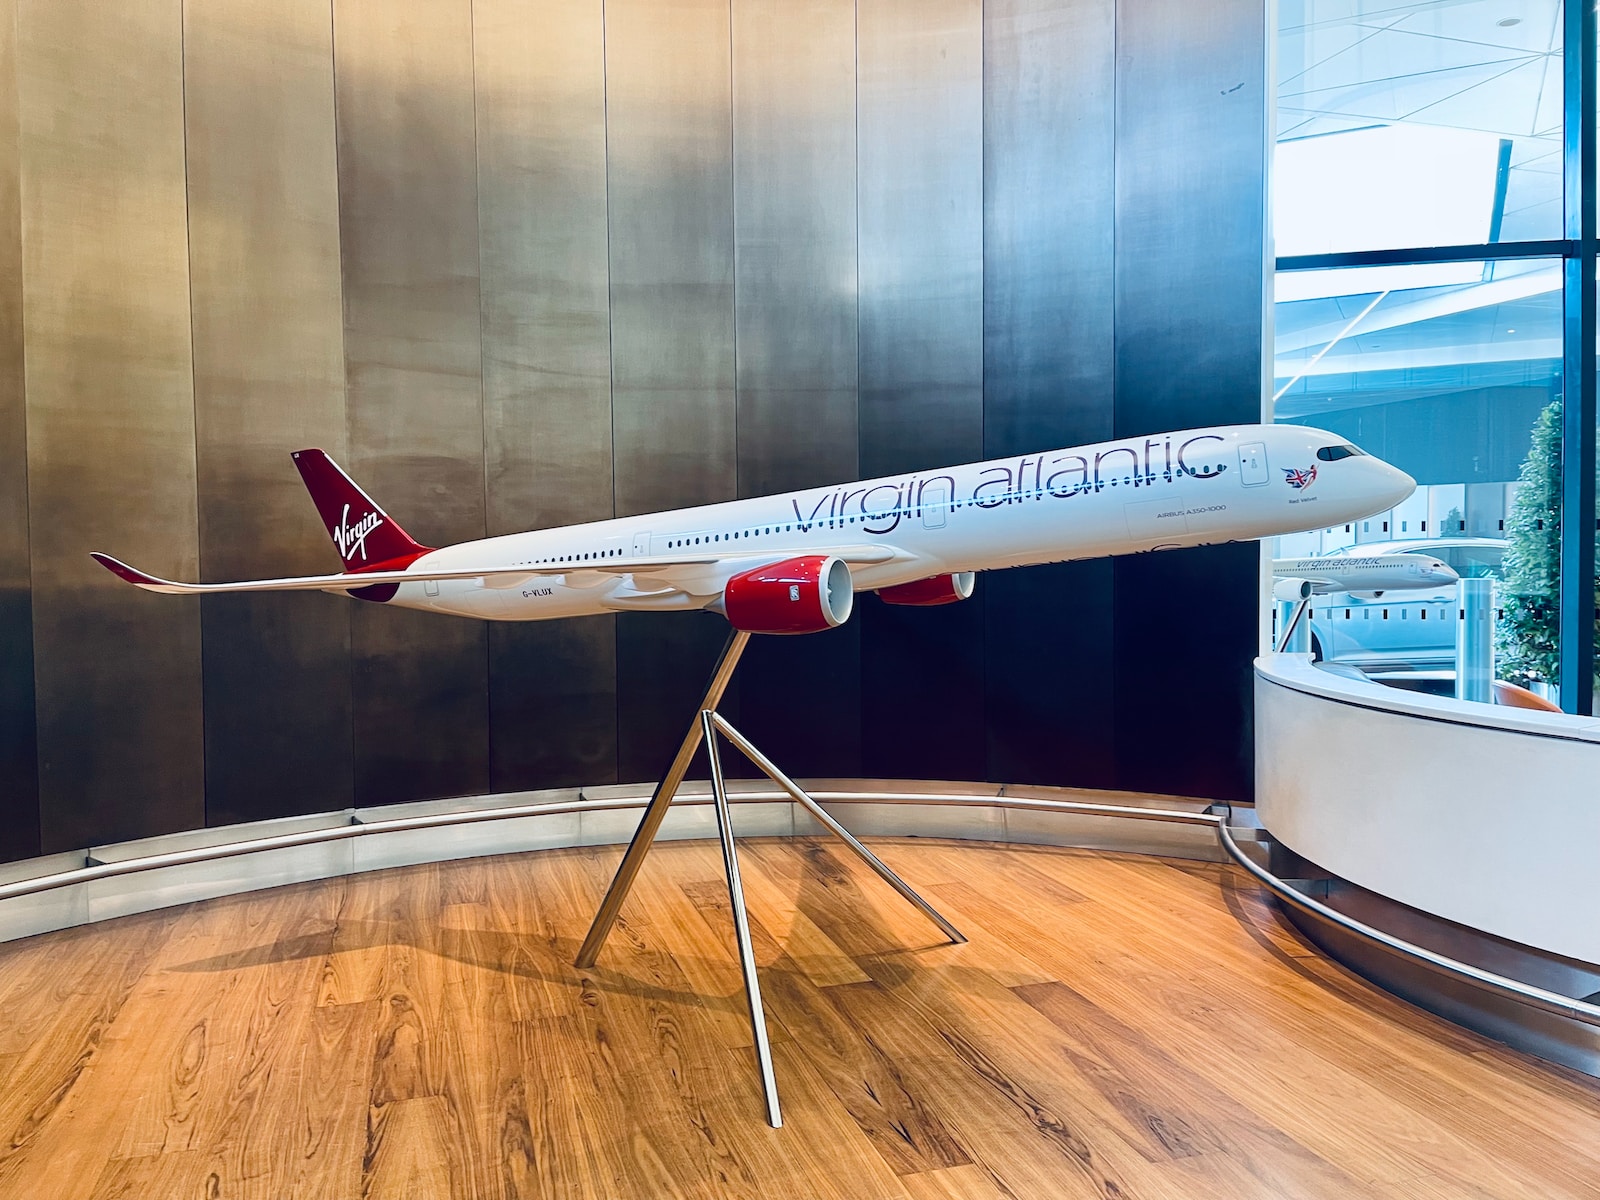 a model of a virgin atlantic airplane on a stand